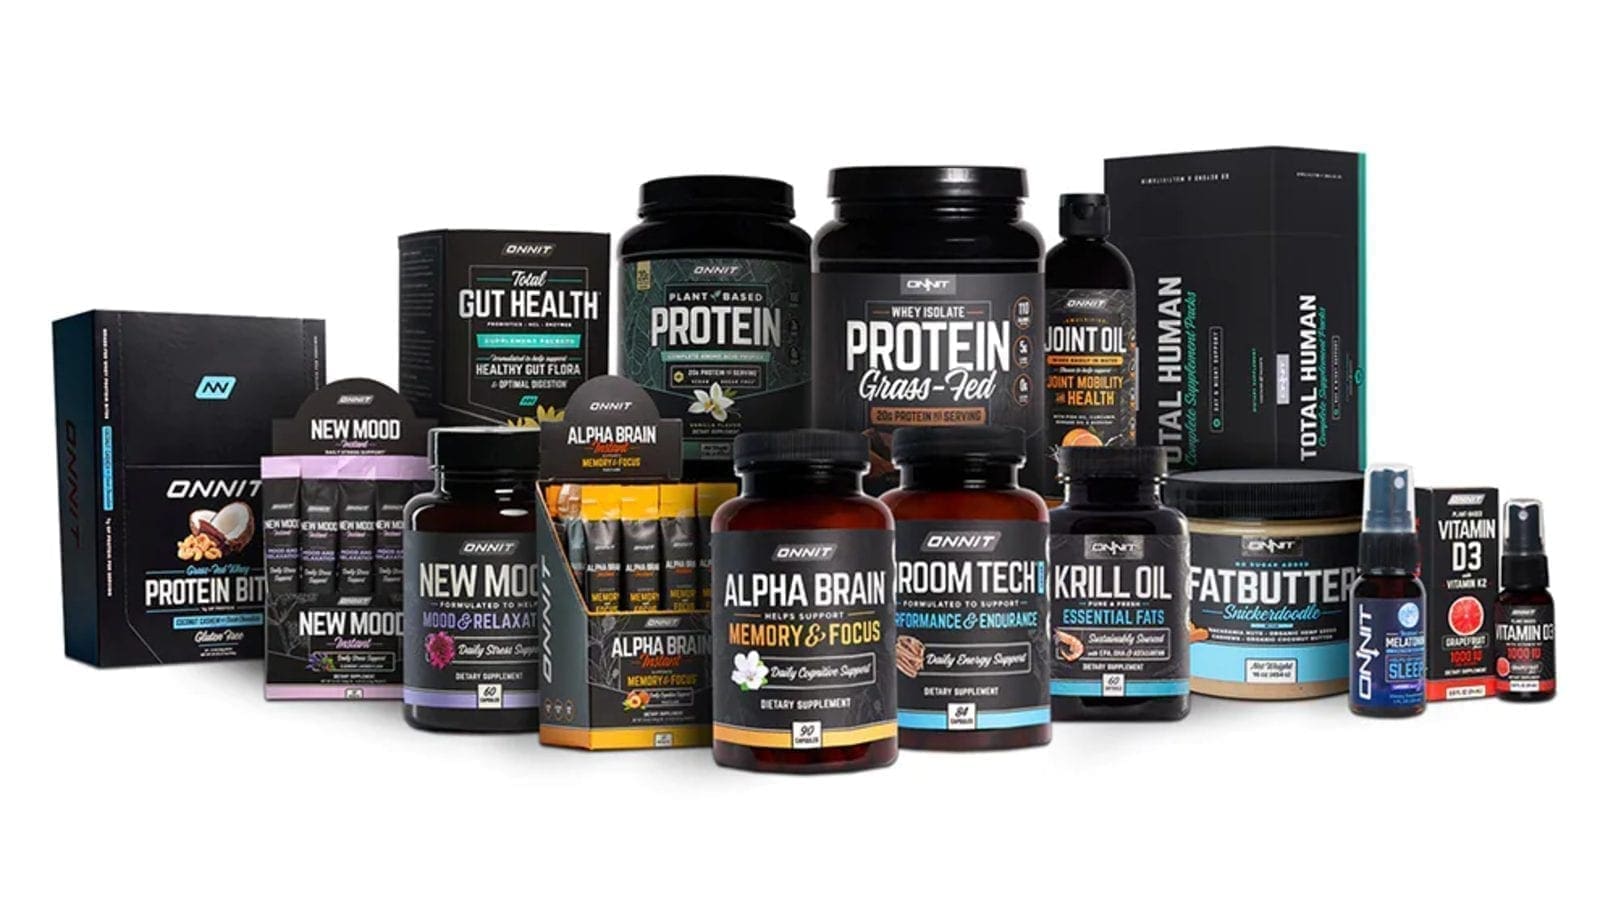 Unilever expands consumer health offerings with acquisition of US supplements brand Onnit